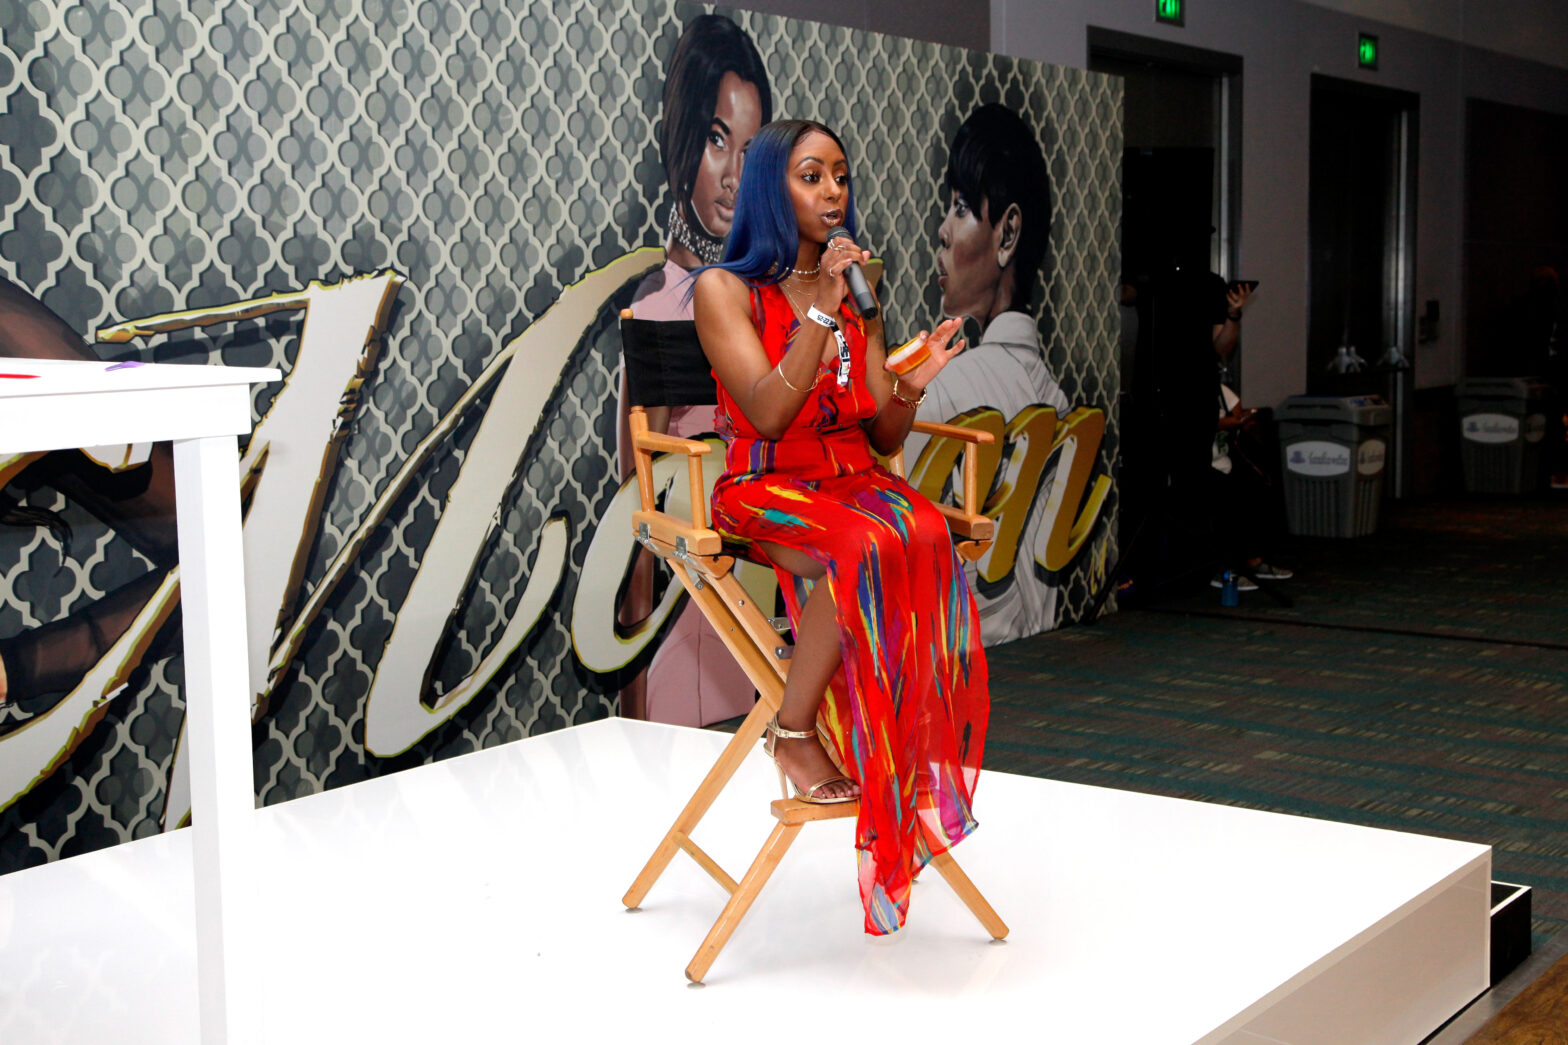 LOS ANGELES, CA - JUNE 24: Jessica Pettway speaks during day one of Fashion and Beauty during the 2017 BET Experience at Los Angeles Convention Center on June 24, 2017 in Los Angeles, California.